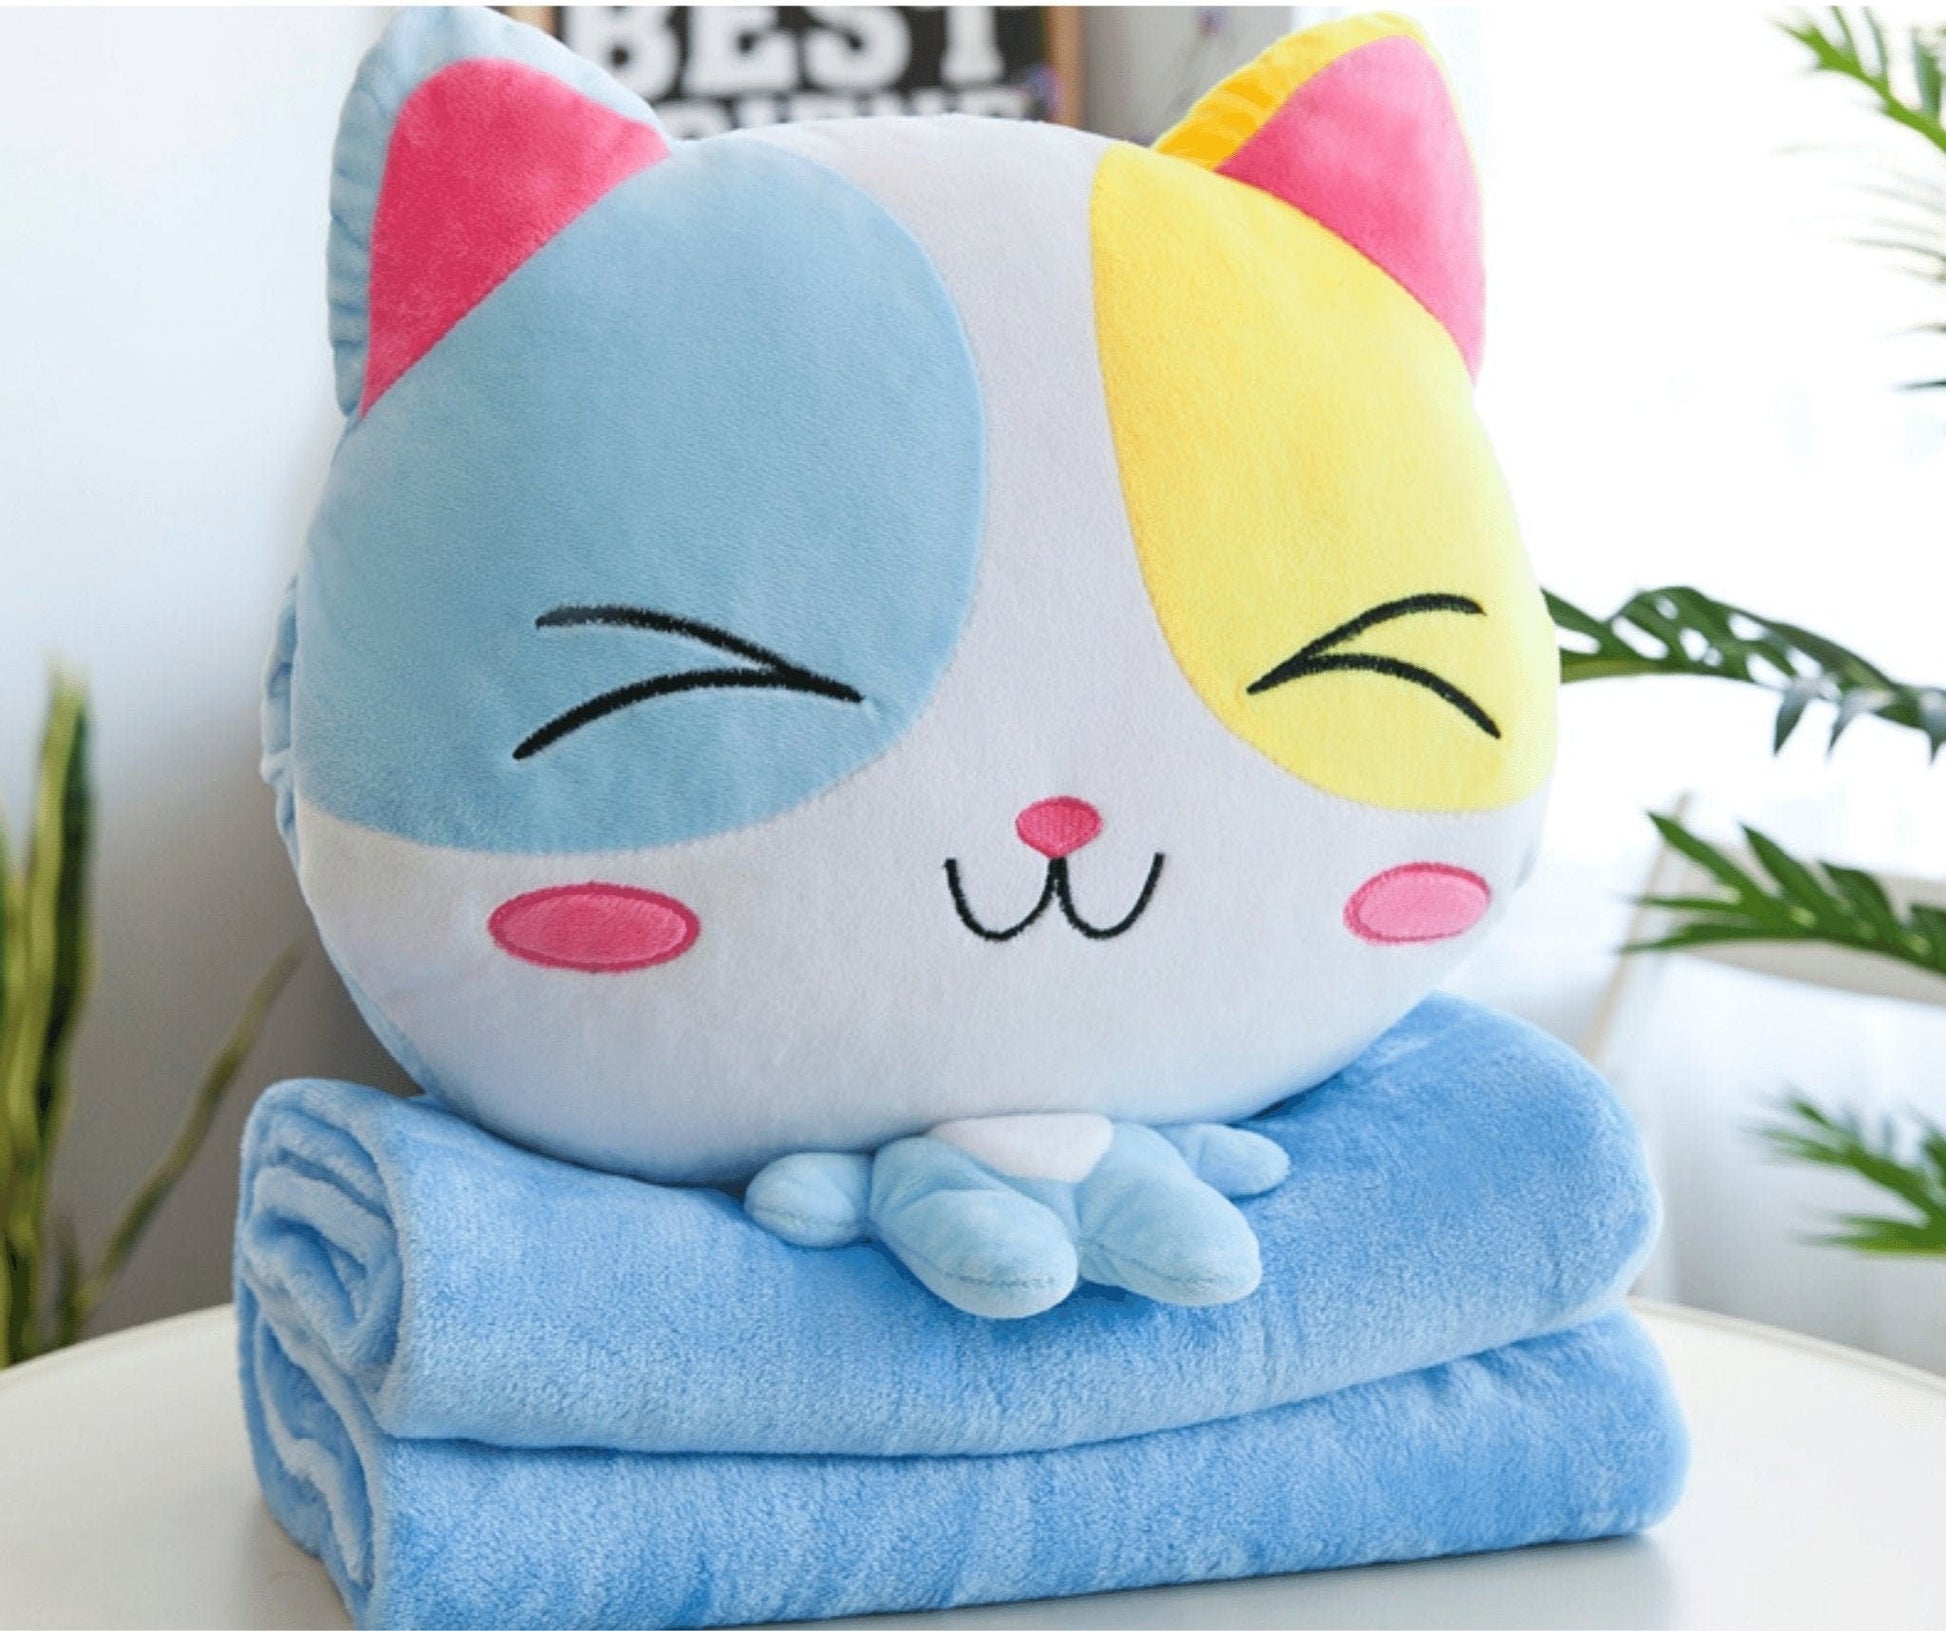 Cuddly Pets with Handwarmers and Blankets - BloomBliss.com